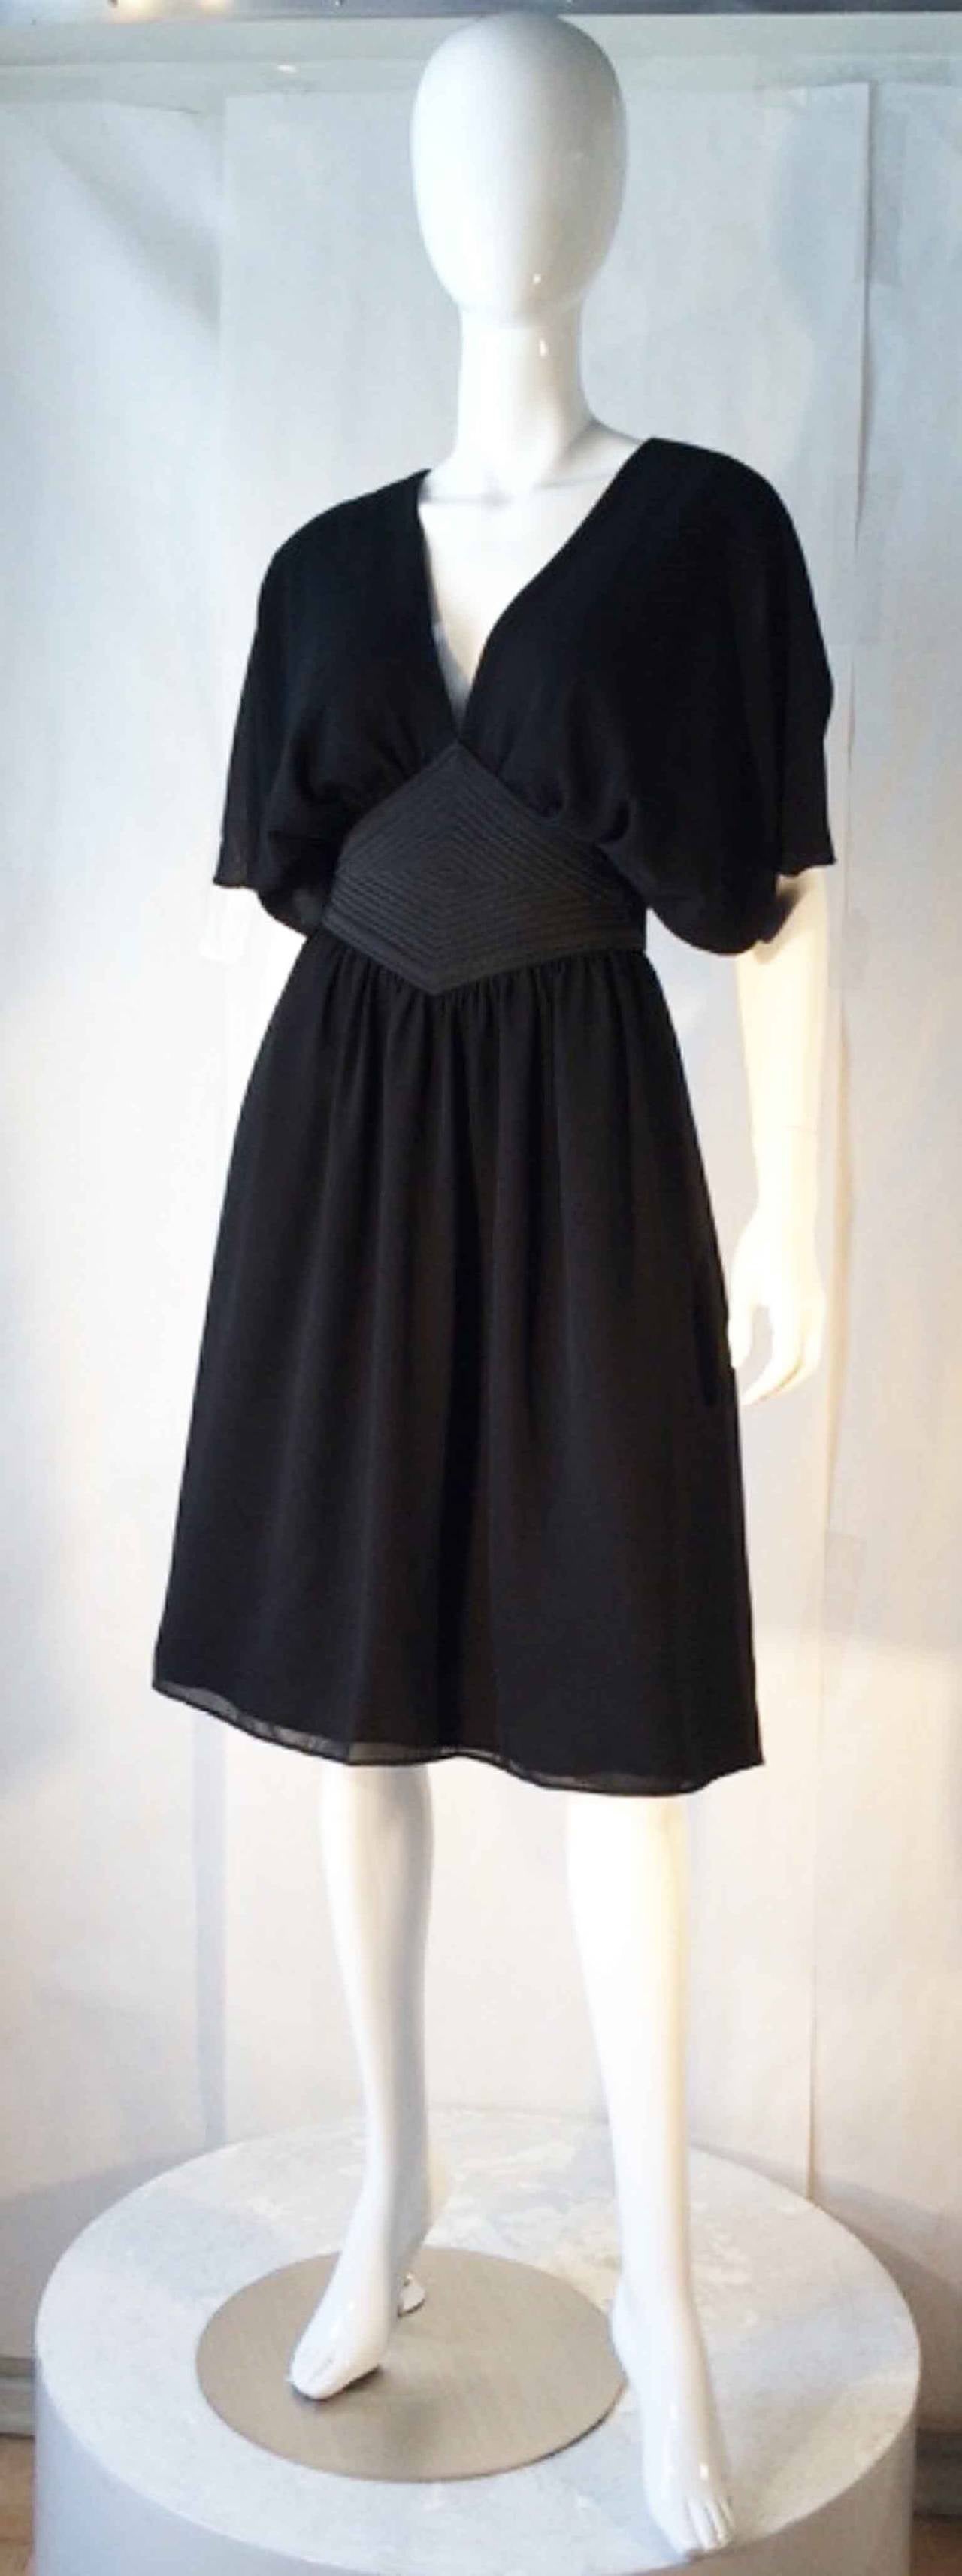 A fine Pierre Cardin cocktail dress. Authentic item features a quilted and sculpted waist band with a double chiffon layer skirt and 